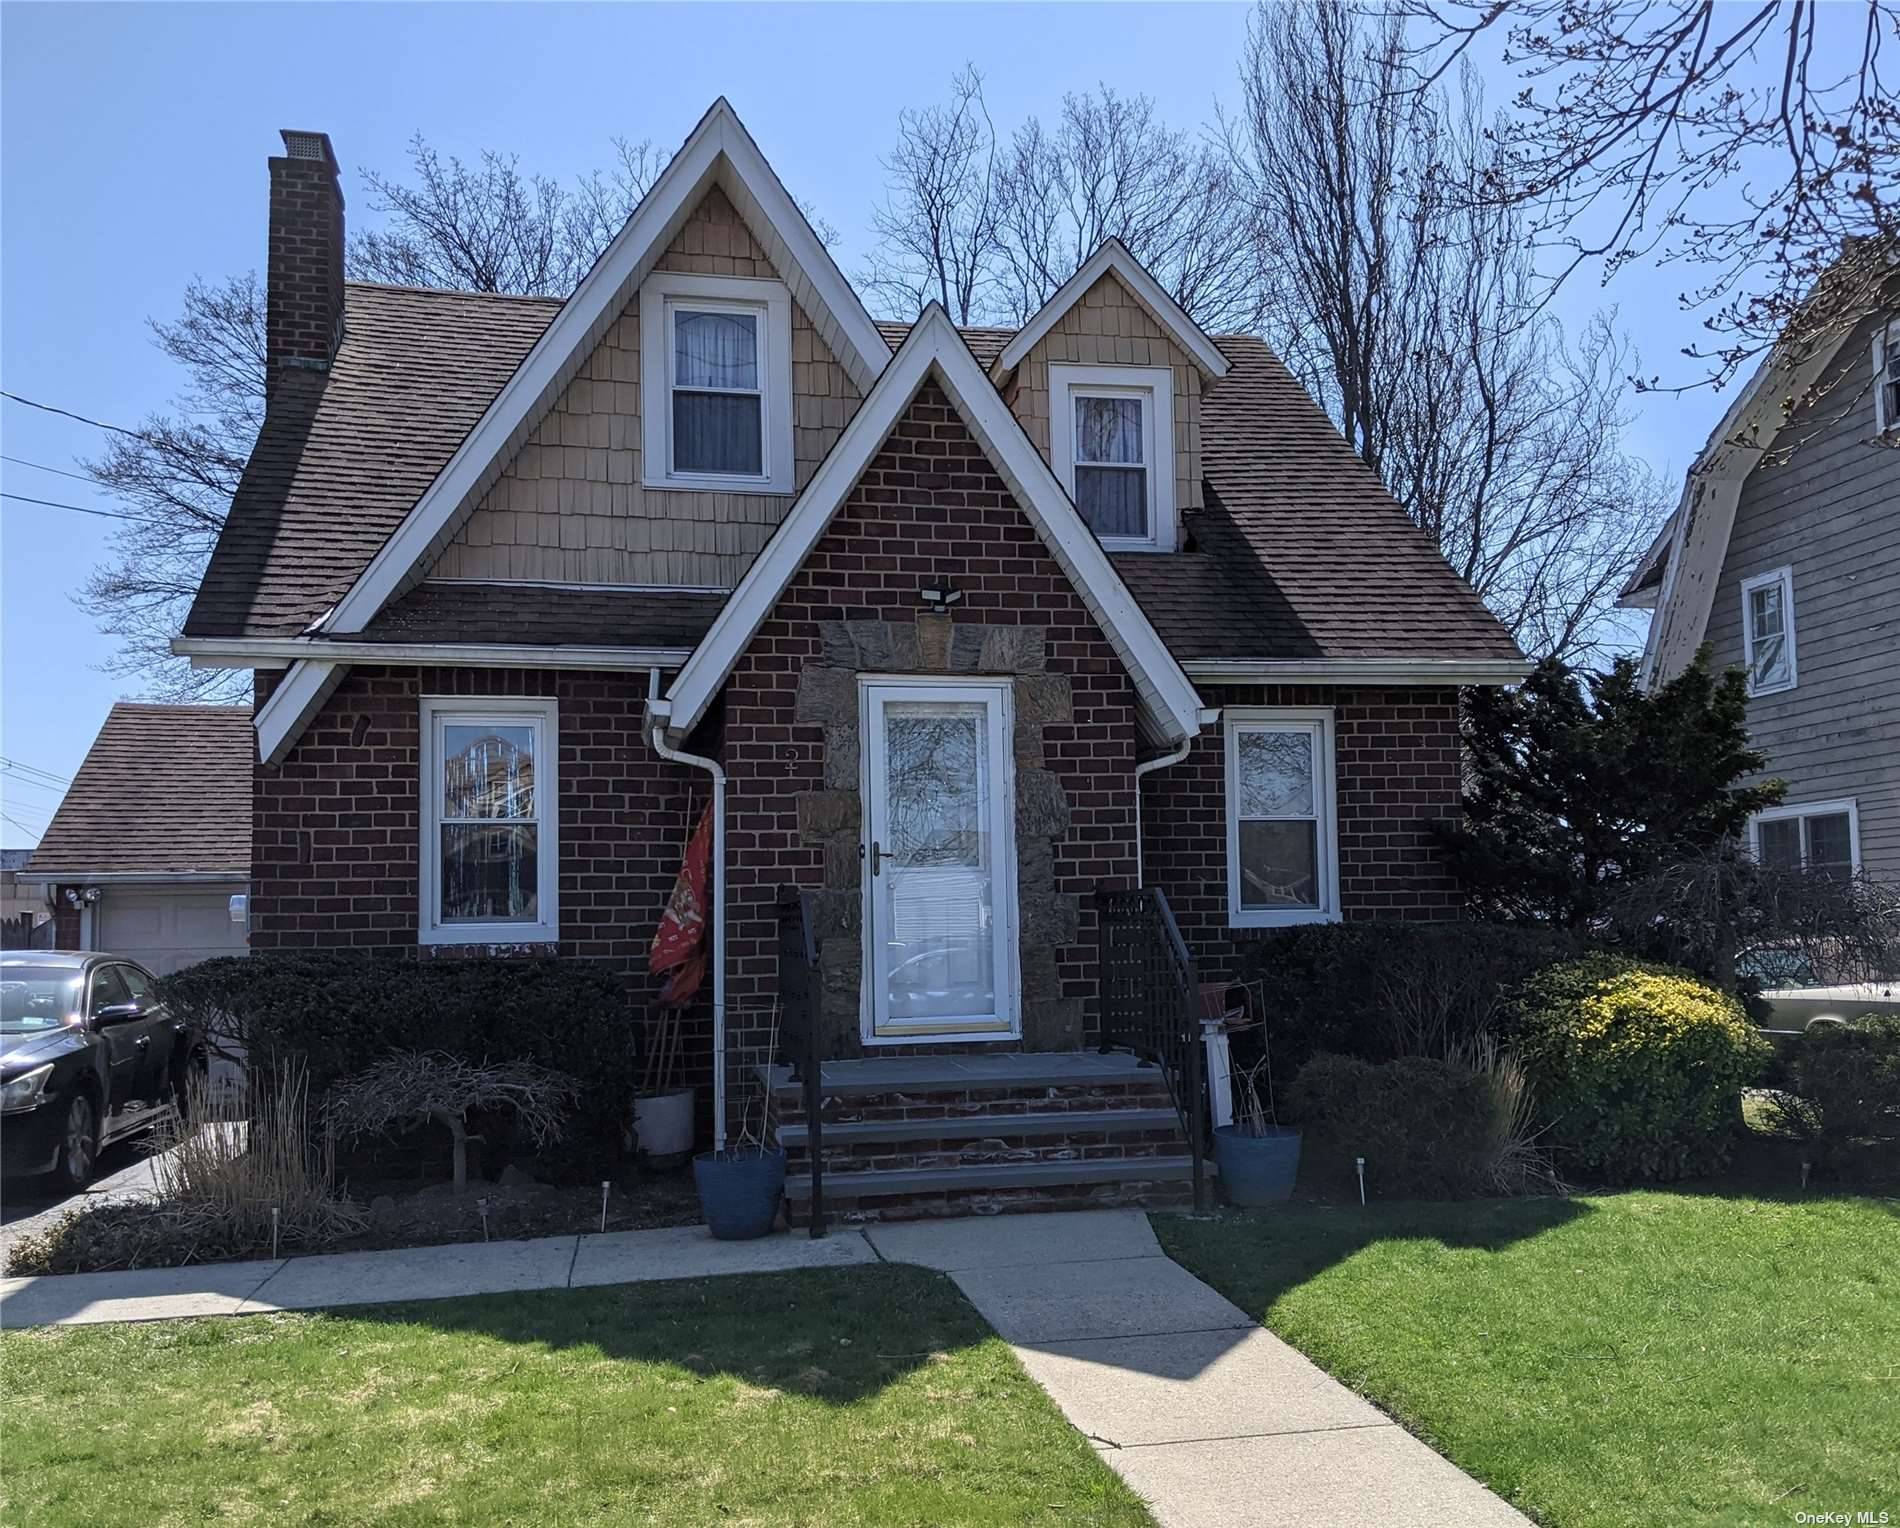 Charming 3 bedroom colonial with entry foyer, hardwood floors, FDR, L R with wood burning fireplace, den office, EIK with pantry, full, finished basement w ceramic tile floors.